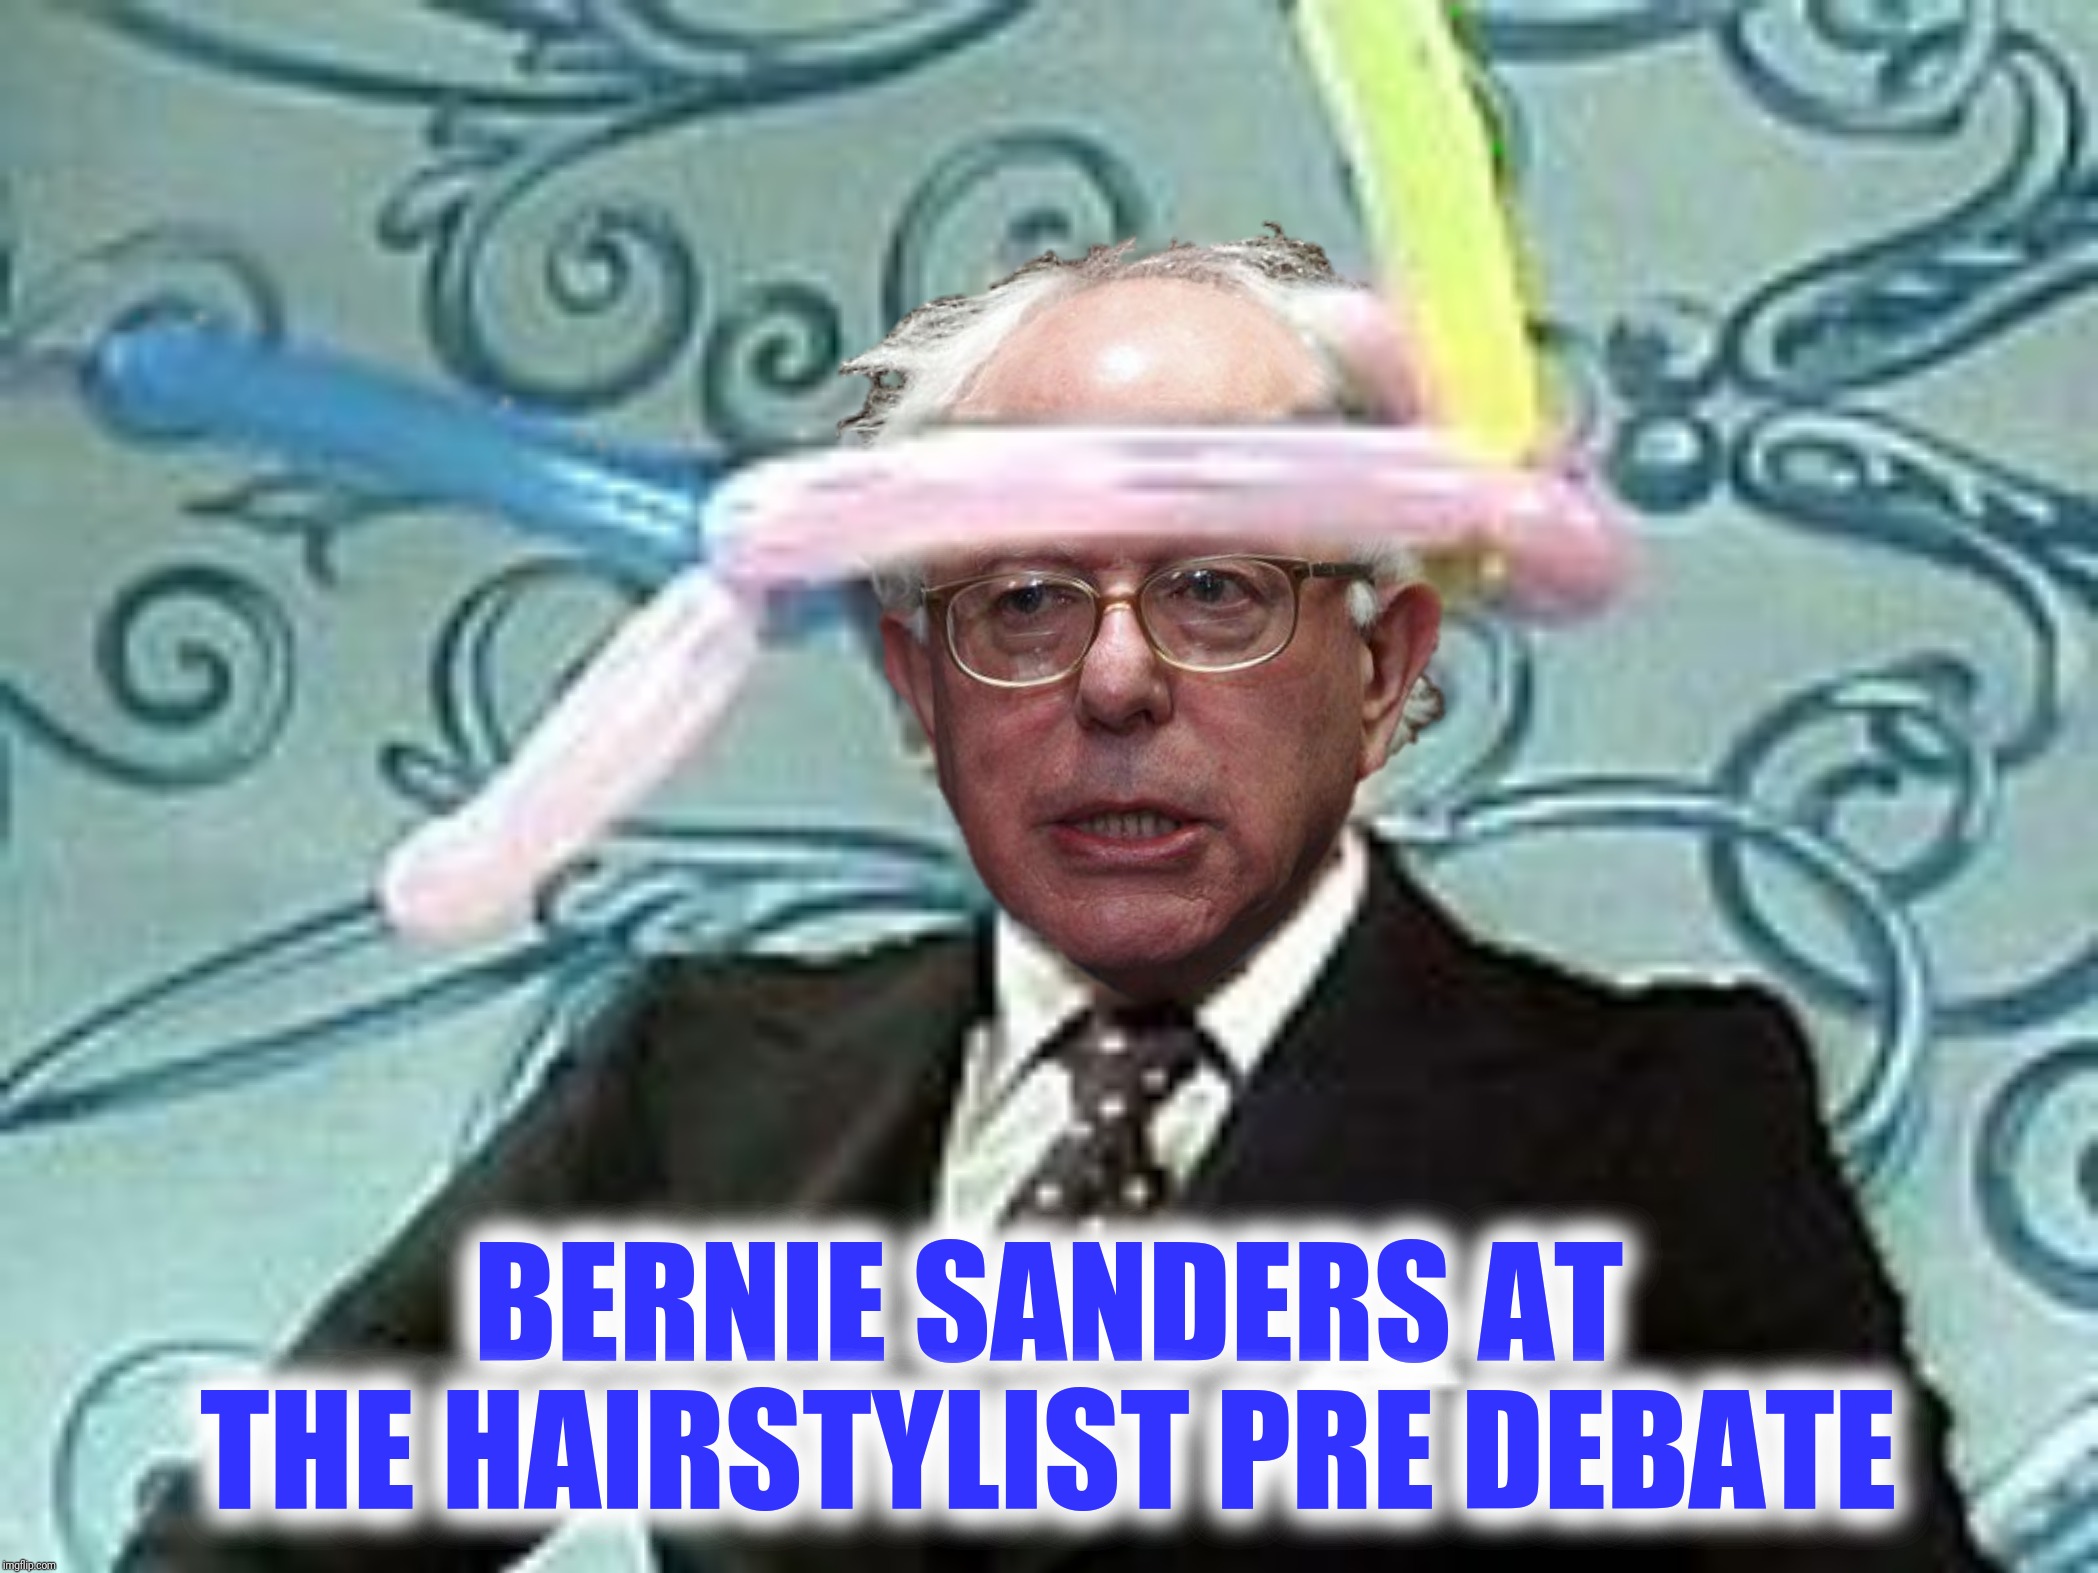 The face you make when you decide to go full Doc Brown | BERNIE SANDERS AT THE HAIRSTYLIST PRE DEBATE | image tagged in bernie sanders,static electricity,debate,hairstyle | made w/ Imgflip meme maker